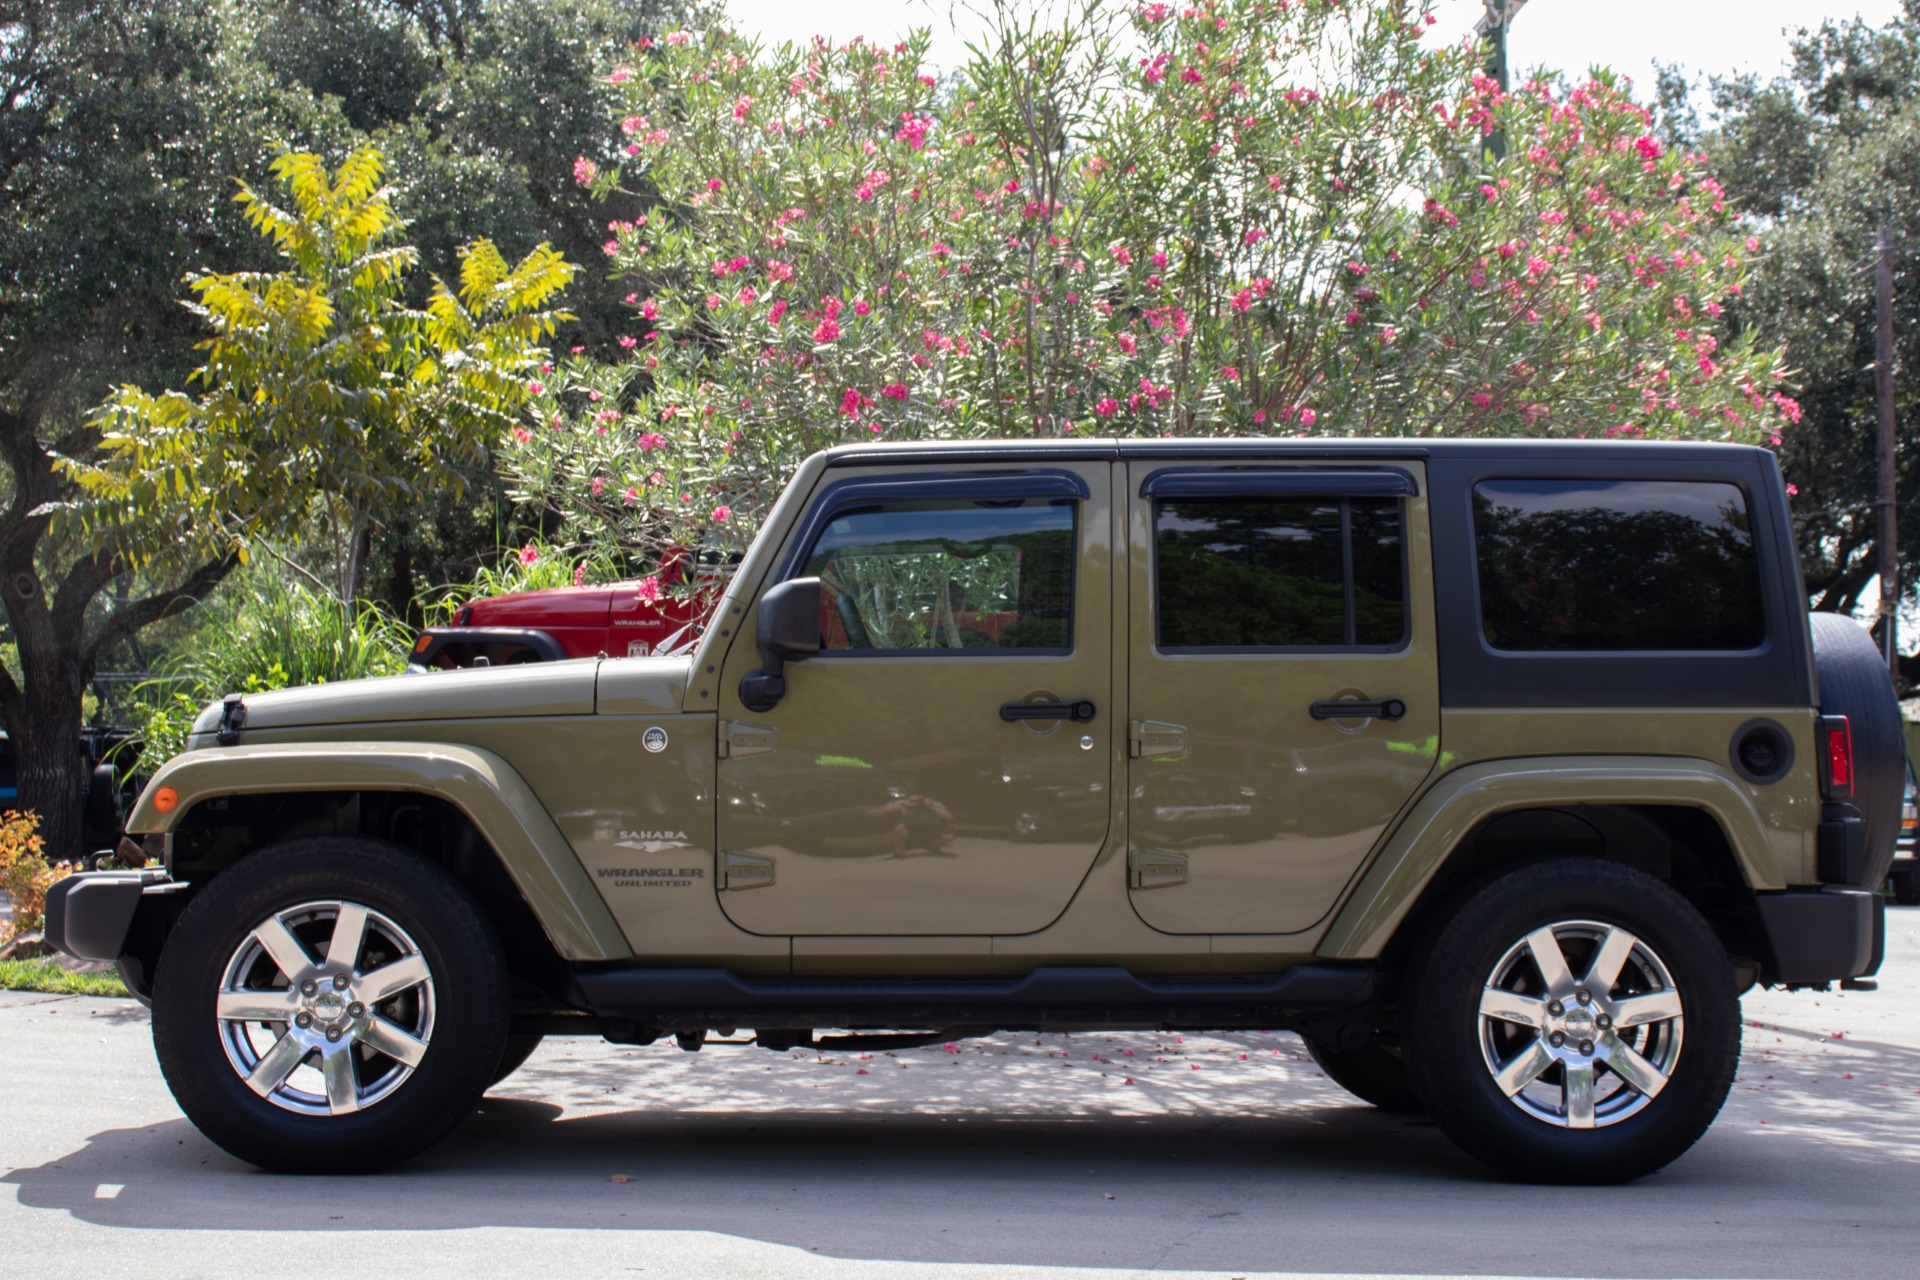 Used 2013 Jeep Wrangler Unlimited Sahara For Sale ($23,995) | Select